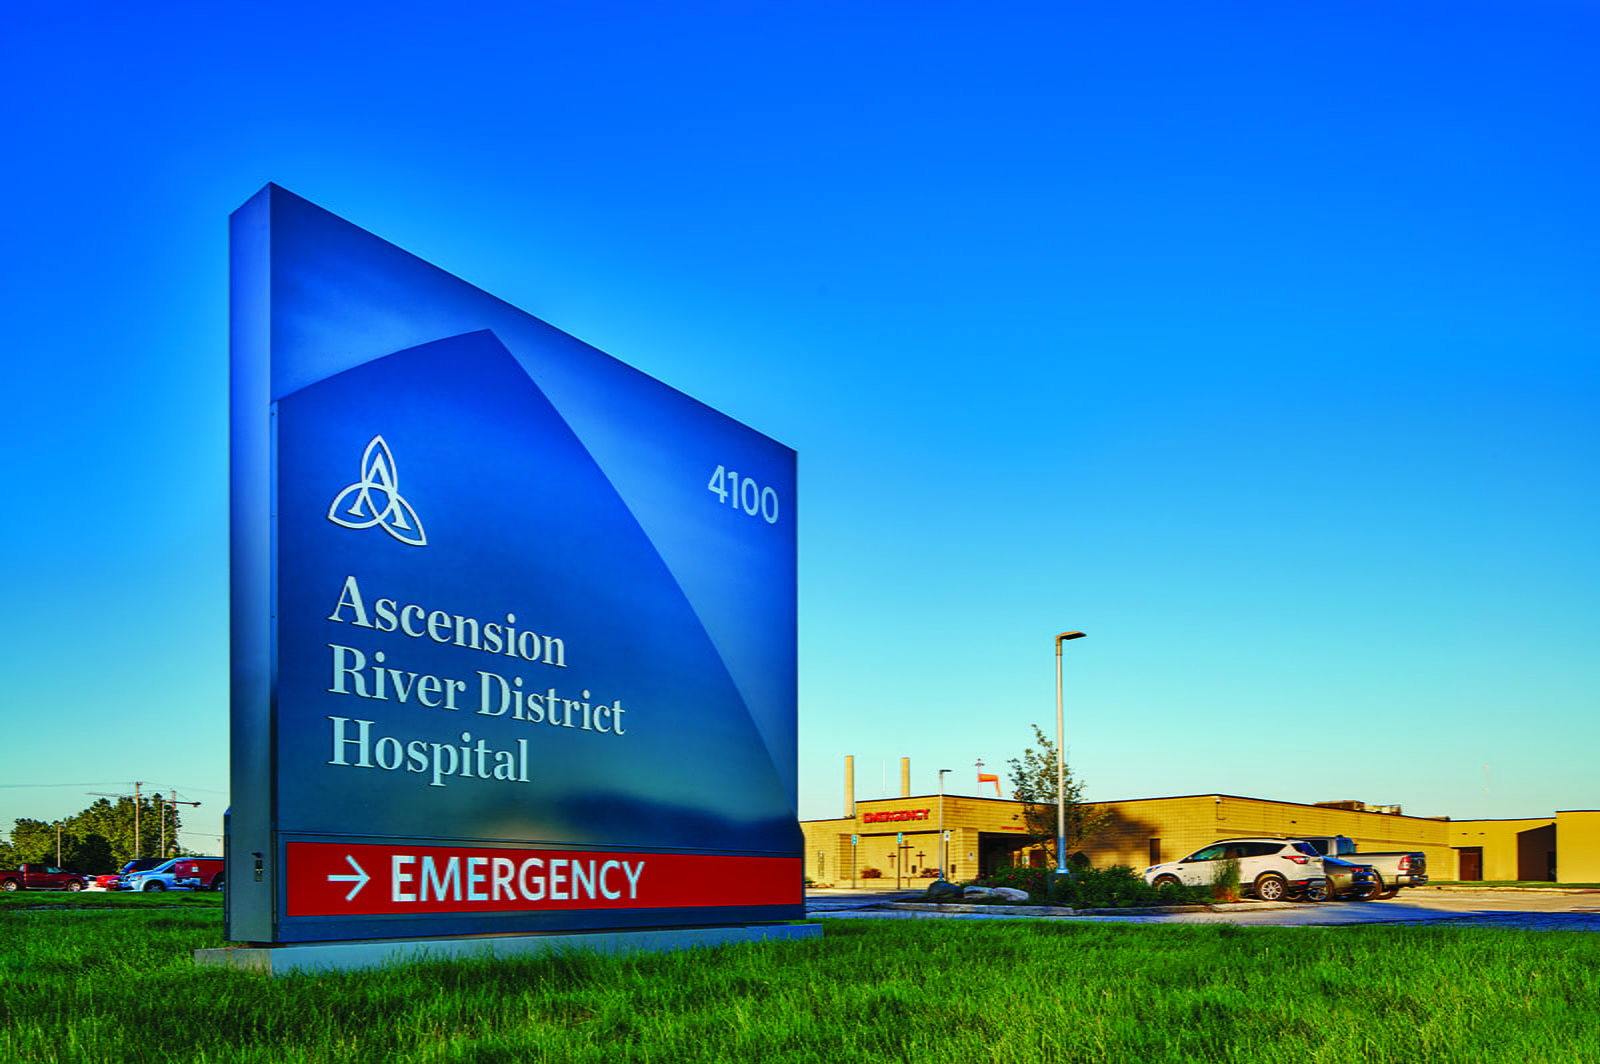 Ascension River District Hospital at 4100 River Rd. in East China, Michigan. 